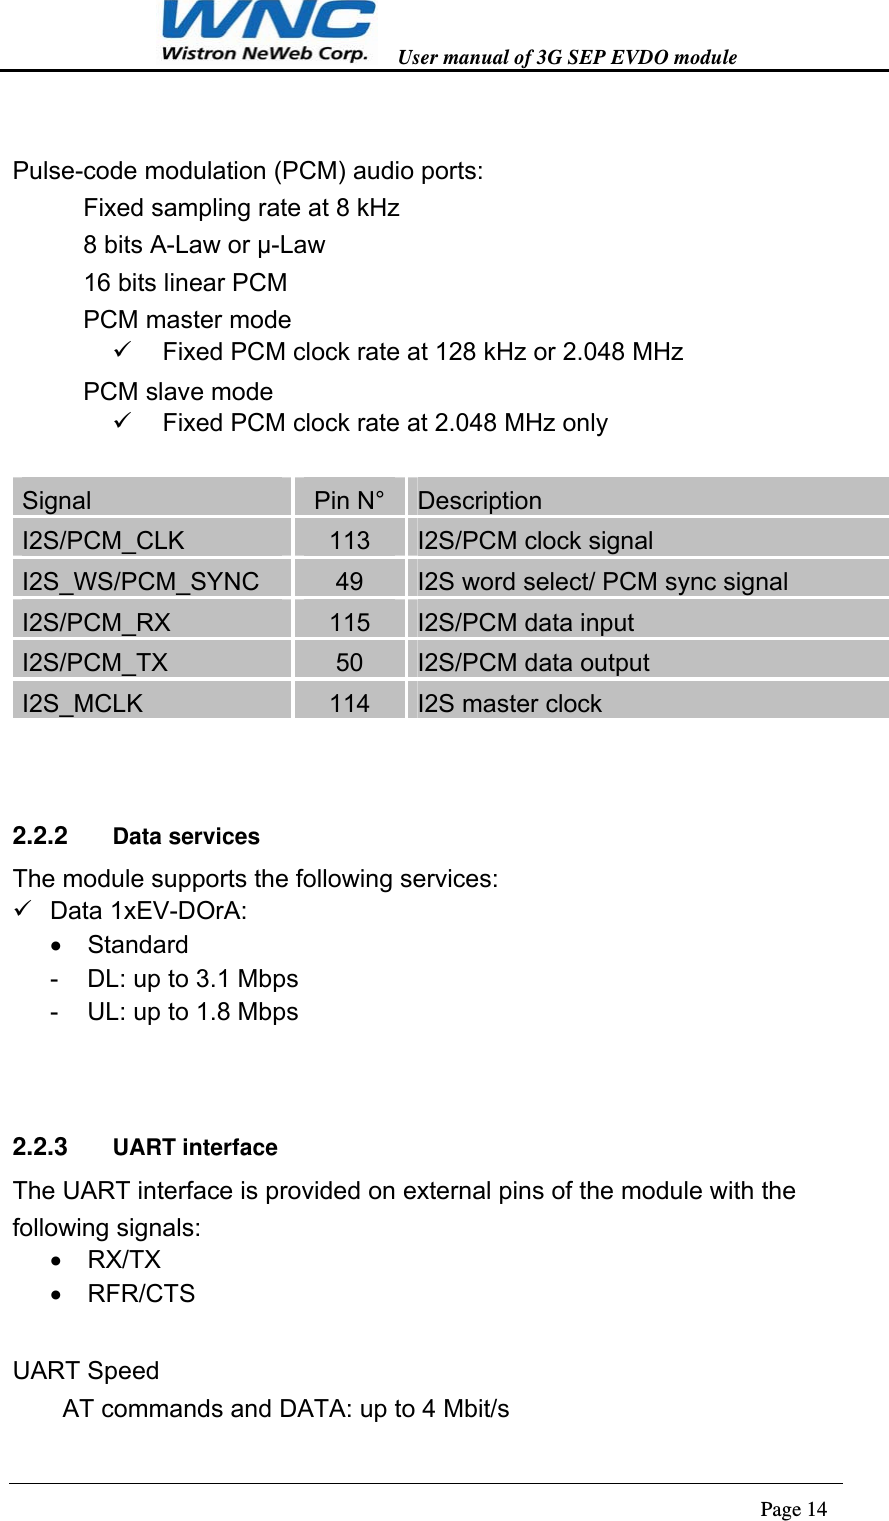   User manual of 3G SEP EVDO module                                                                      Page 14   Pulse-code modulation (PCM) audio ports: 　Fixed sampling rate at 8 kHz 　8 bits A-Law or µ-Law   　16 bits linear PCM 　PCM master mode   Fixed PCM clock rate at 128 kHz or 2.048 MHz 　PCM slave mode   Fixed PCM clock rate at 2.048 MHz only  Signal  Pin N°  Description I2S/PCM_CLK  113  I2S/PCM clock signal I2S_WS/PCM_SYNC  49  I2S word select/ PCM sync signal I2S/PCM_RX  115  I2S/PCM data input I2S/PCM_TX  50  I2S/PCM data output I2S_MCLK  114  I2S master clock  2.2.2  Data services The module supports the following services:  Data 1xEV-DOrA:  Standard -  DL: up to 3.1 Mbps -  UL: up to 1.8 Mbps  2.2.3  UART interface The UART interface is provided on external pins of the module with the following signals:  RX/TX  RFR/CTS  UART Speed   AT commands and DATA: up to 4 Mbit/s 